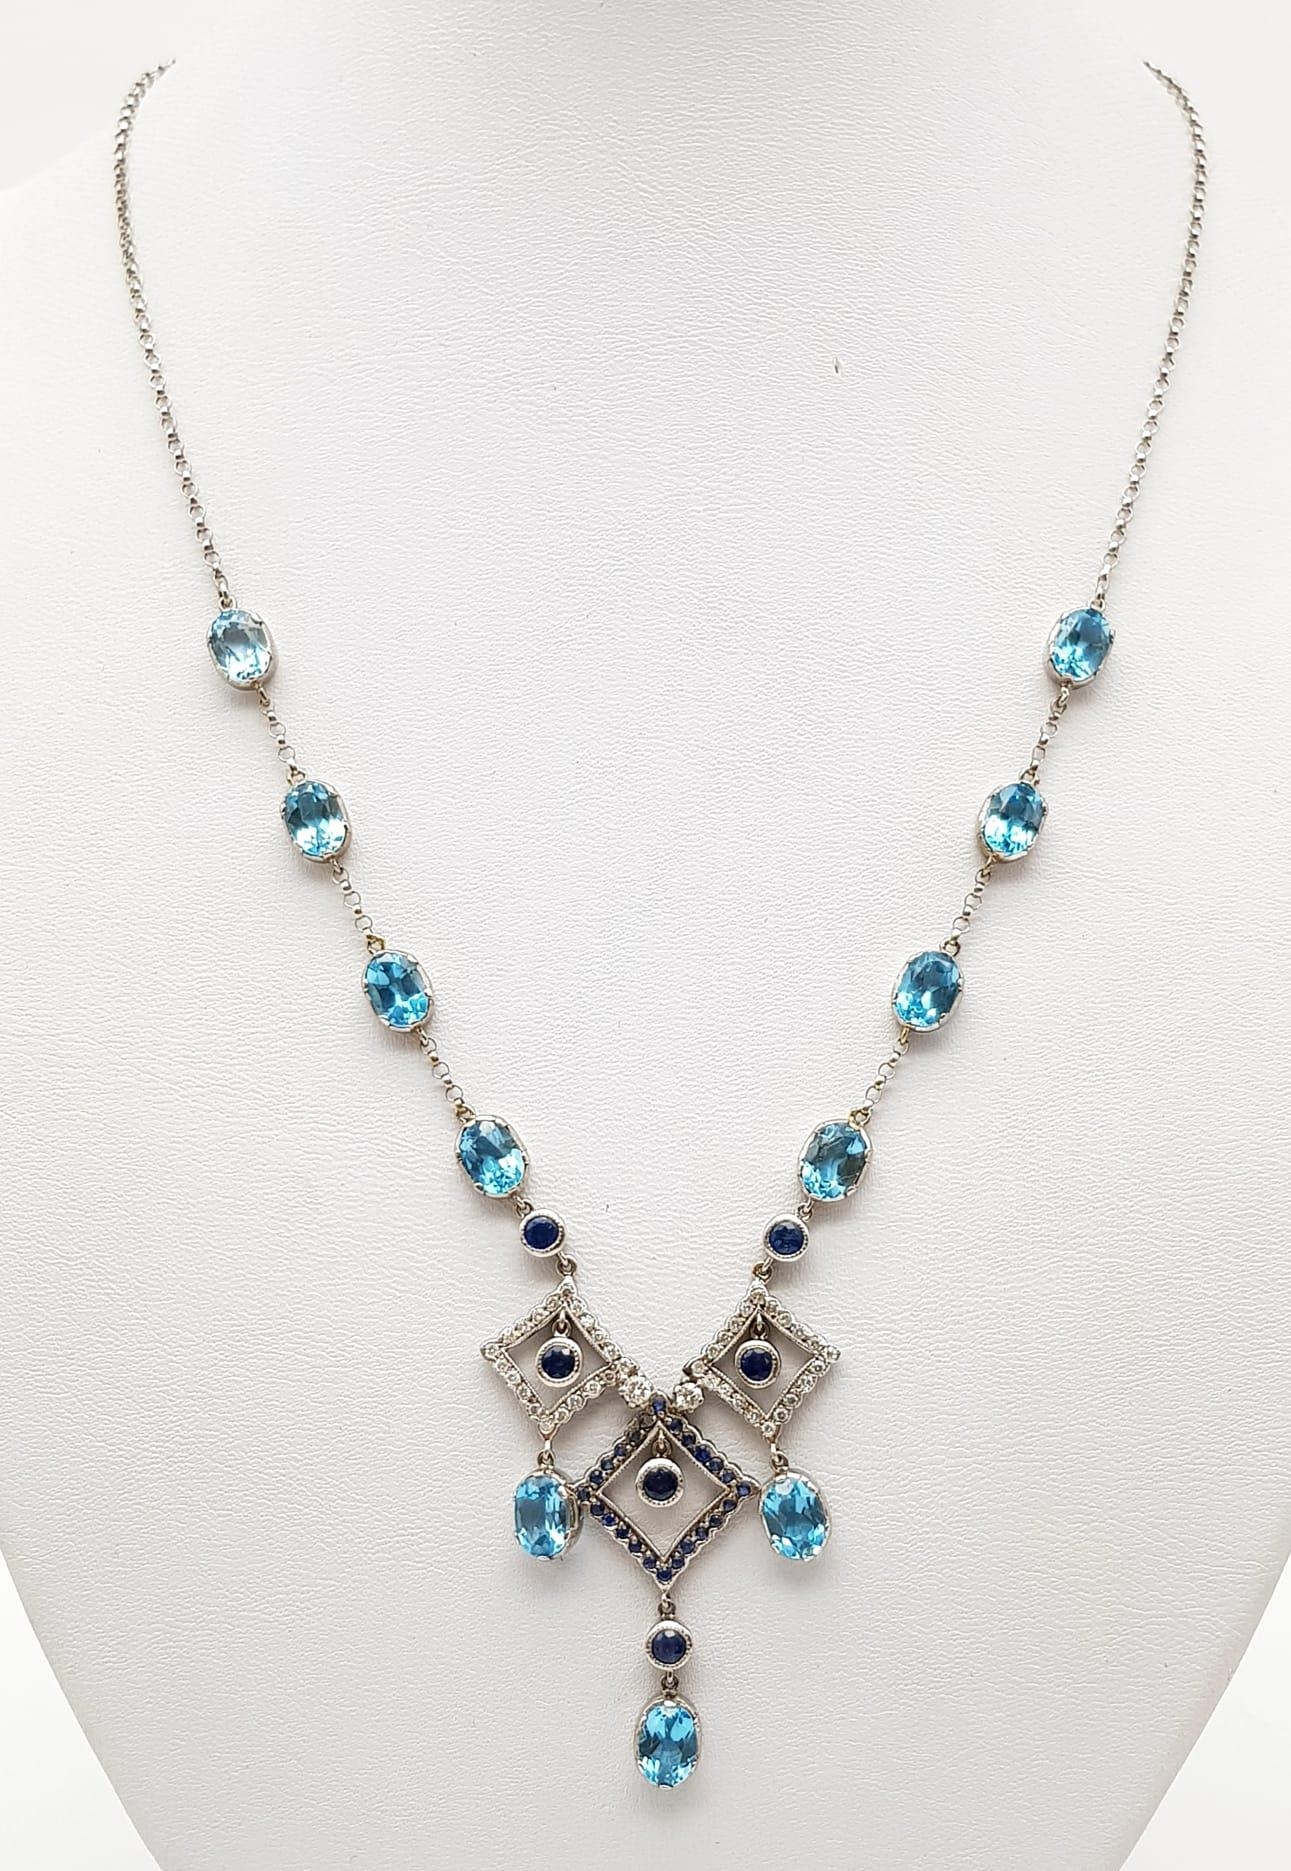 An Elegant 18K White Gold Necklace - interspersed with clean aquamarine stones and climaxing in a